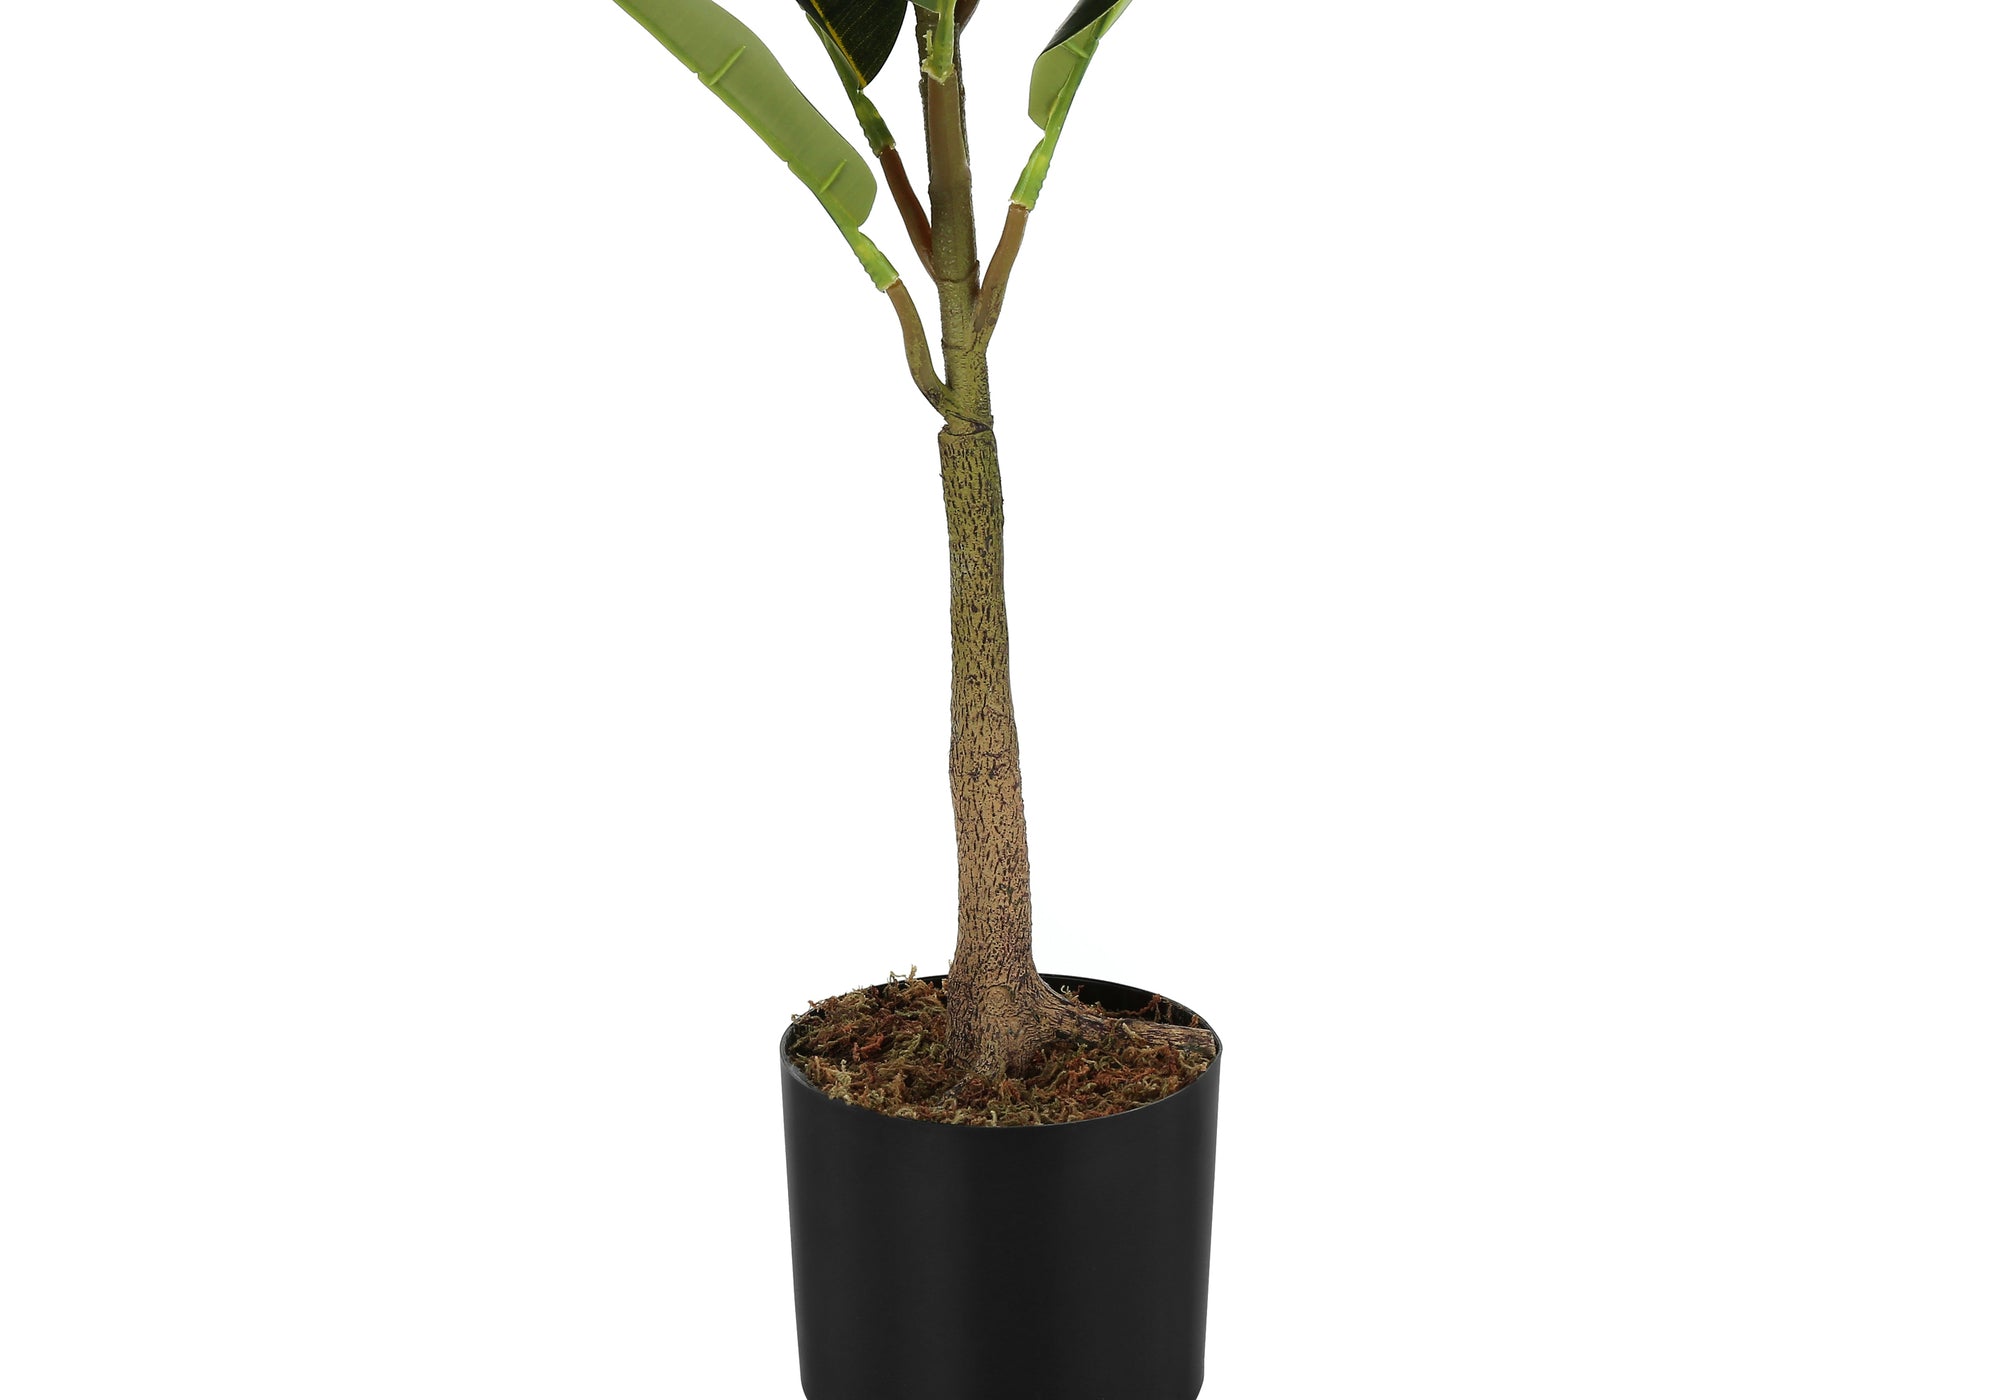 MN-529547    Artificial Plant, 40" Tall, Rubber Tree, Indoor, Faux, Fake, Floor, Greenery, Potted, Real Touch, Decorative, Green Leaves, Black Pot